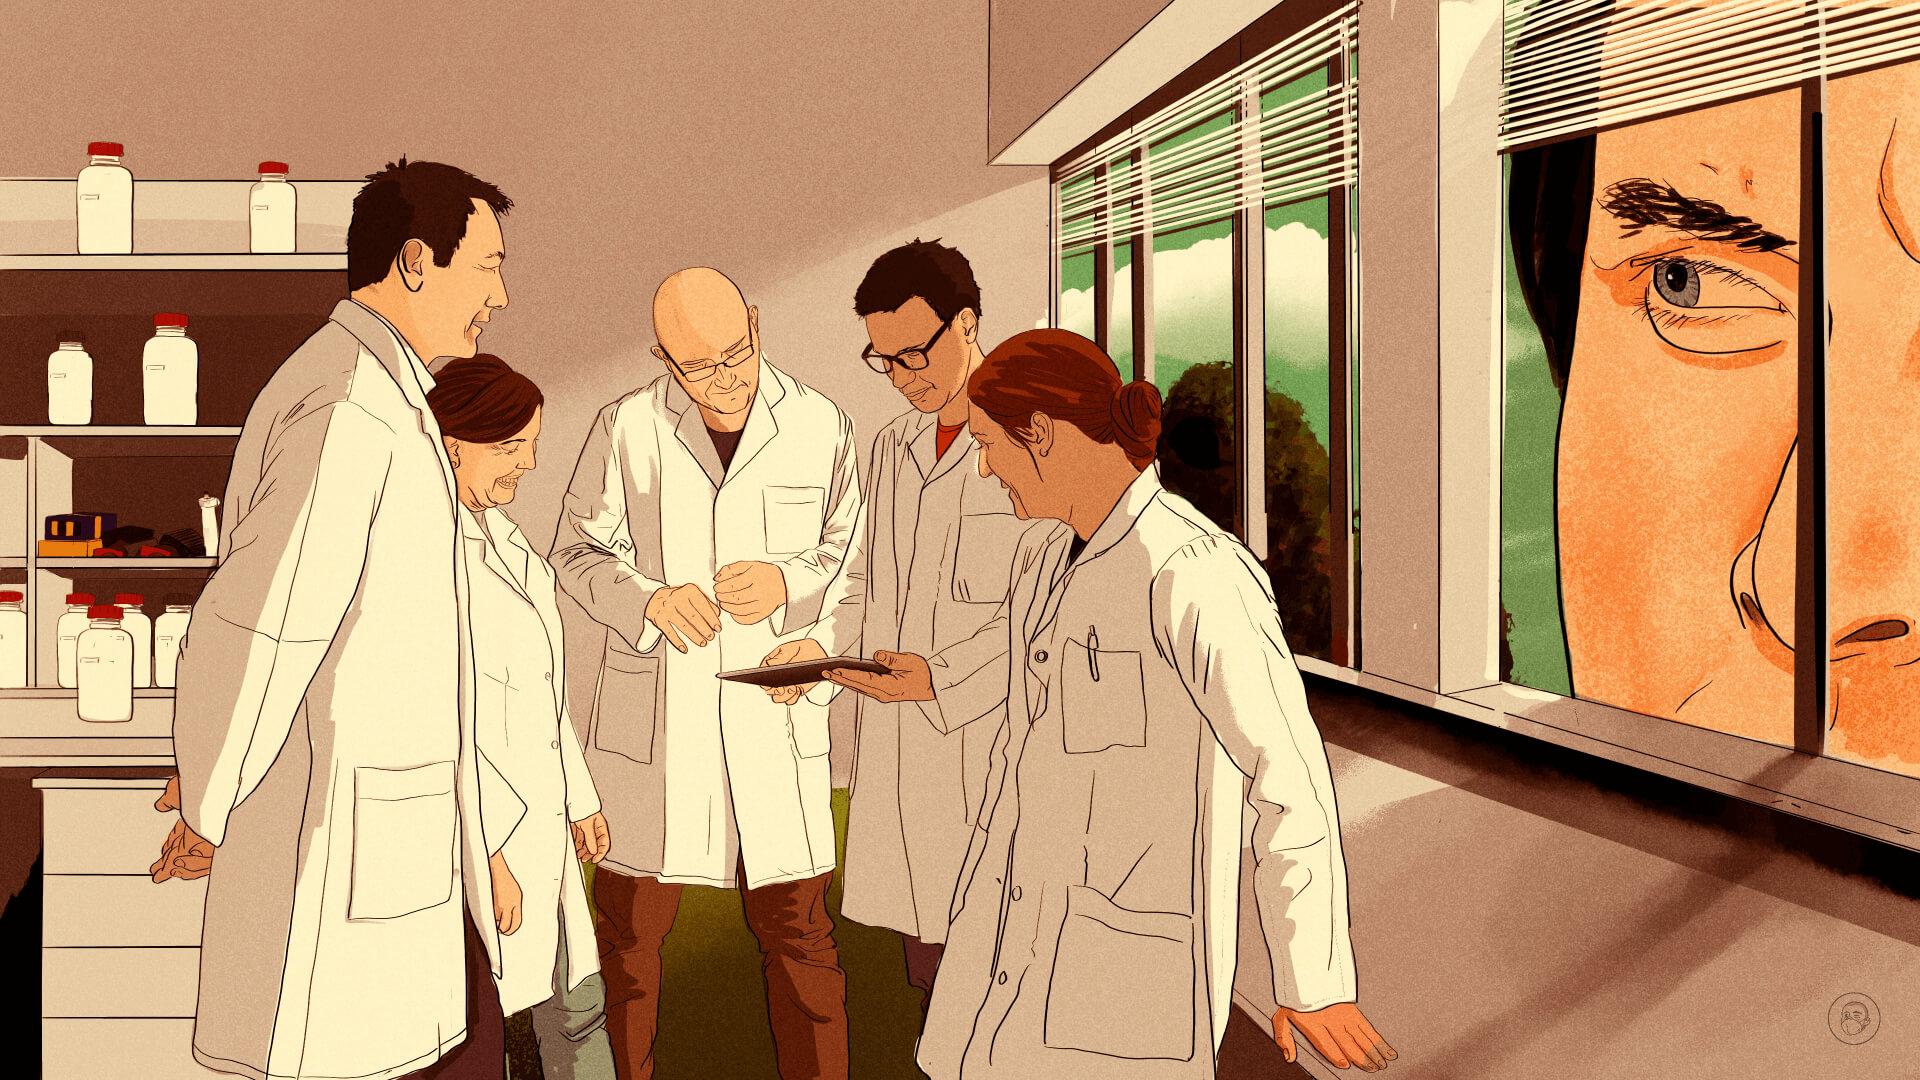 An illustration by Alex Santafe depicting a group of scientists being observed by a man outside